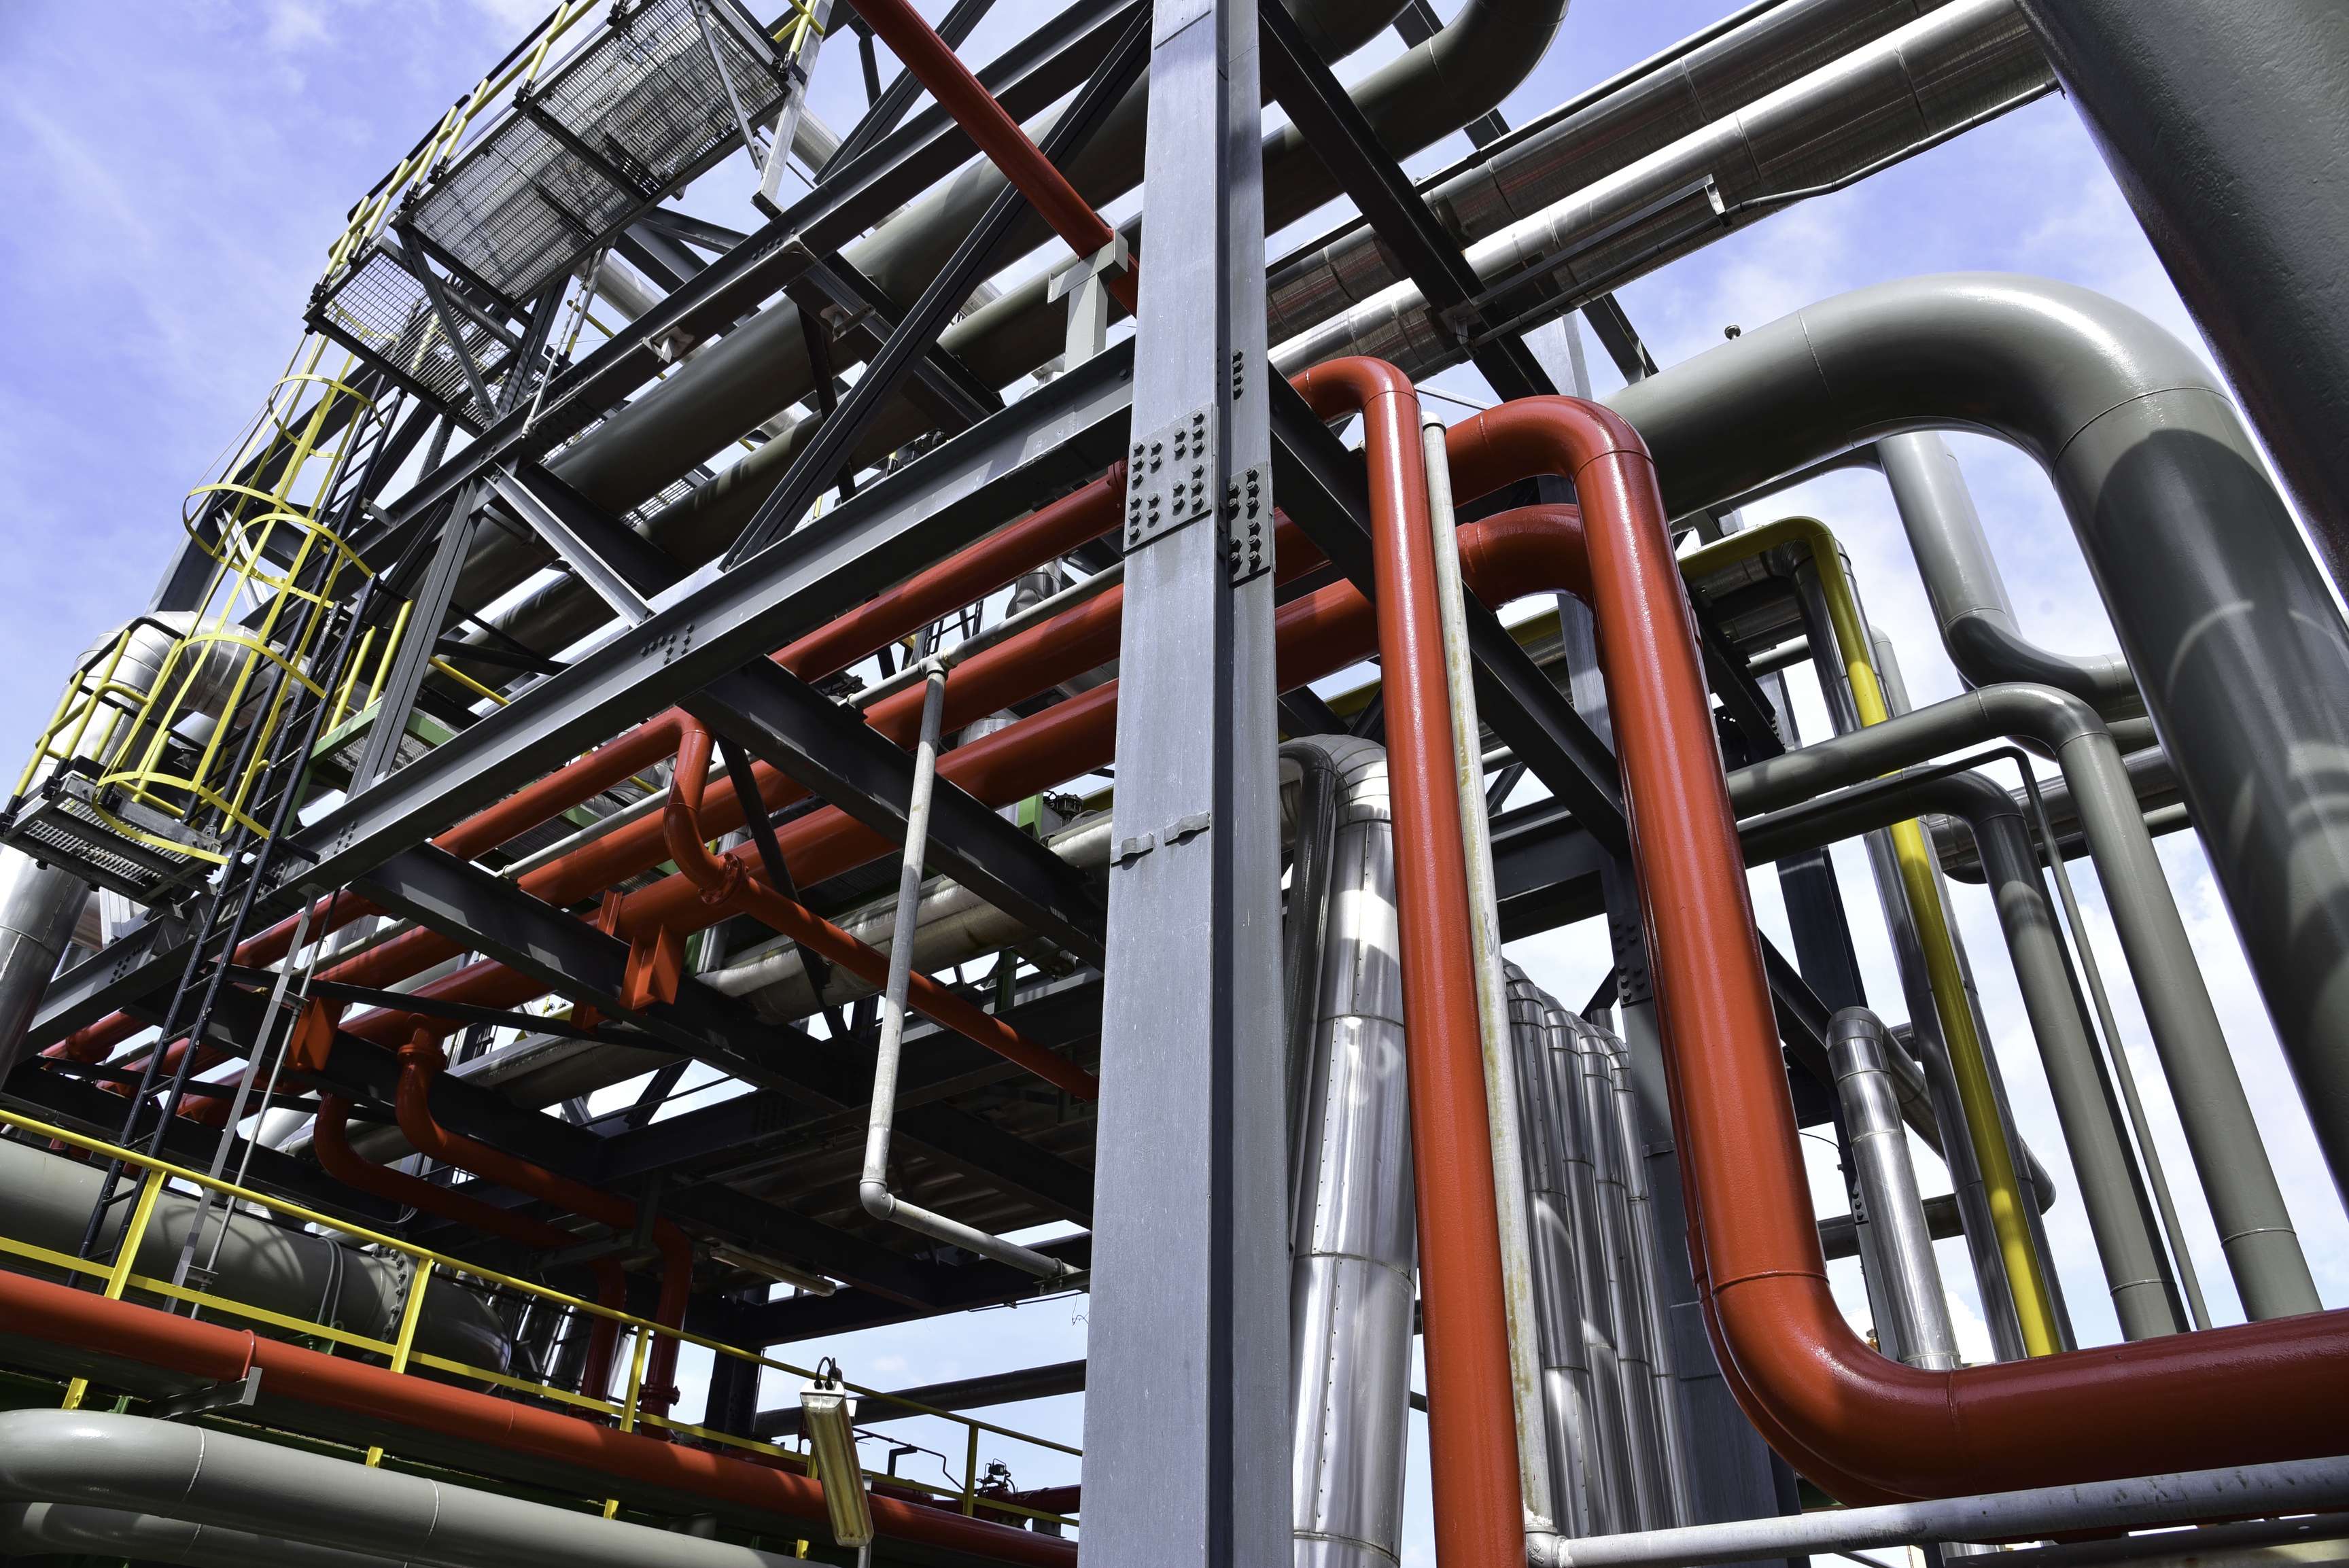 Frog's eye view: pipeline system with yellow and gray racks and gray, yellow and red pipelines.